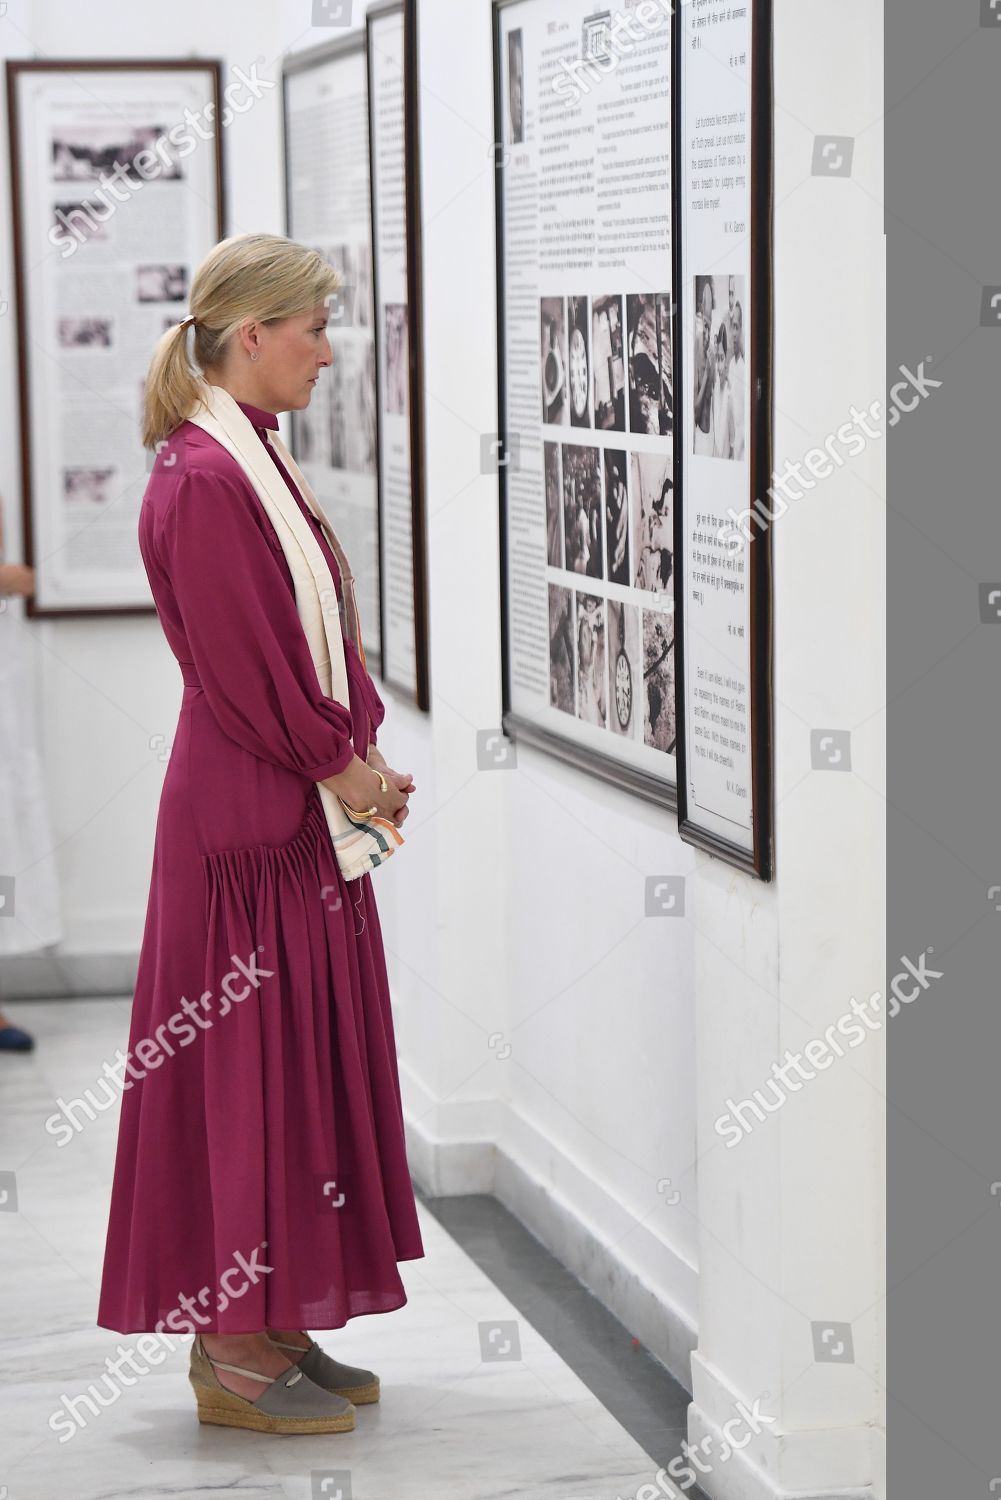 sophie-countess-of-wessex-visit-to-india-shutterstock-editorial-10227195cv.jpg